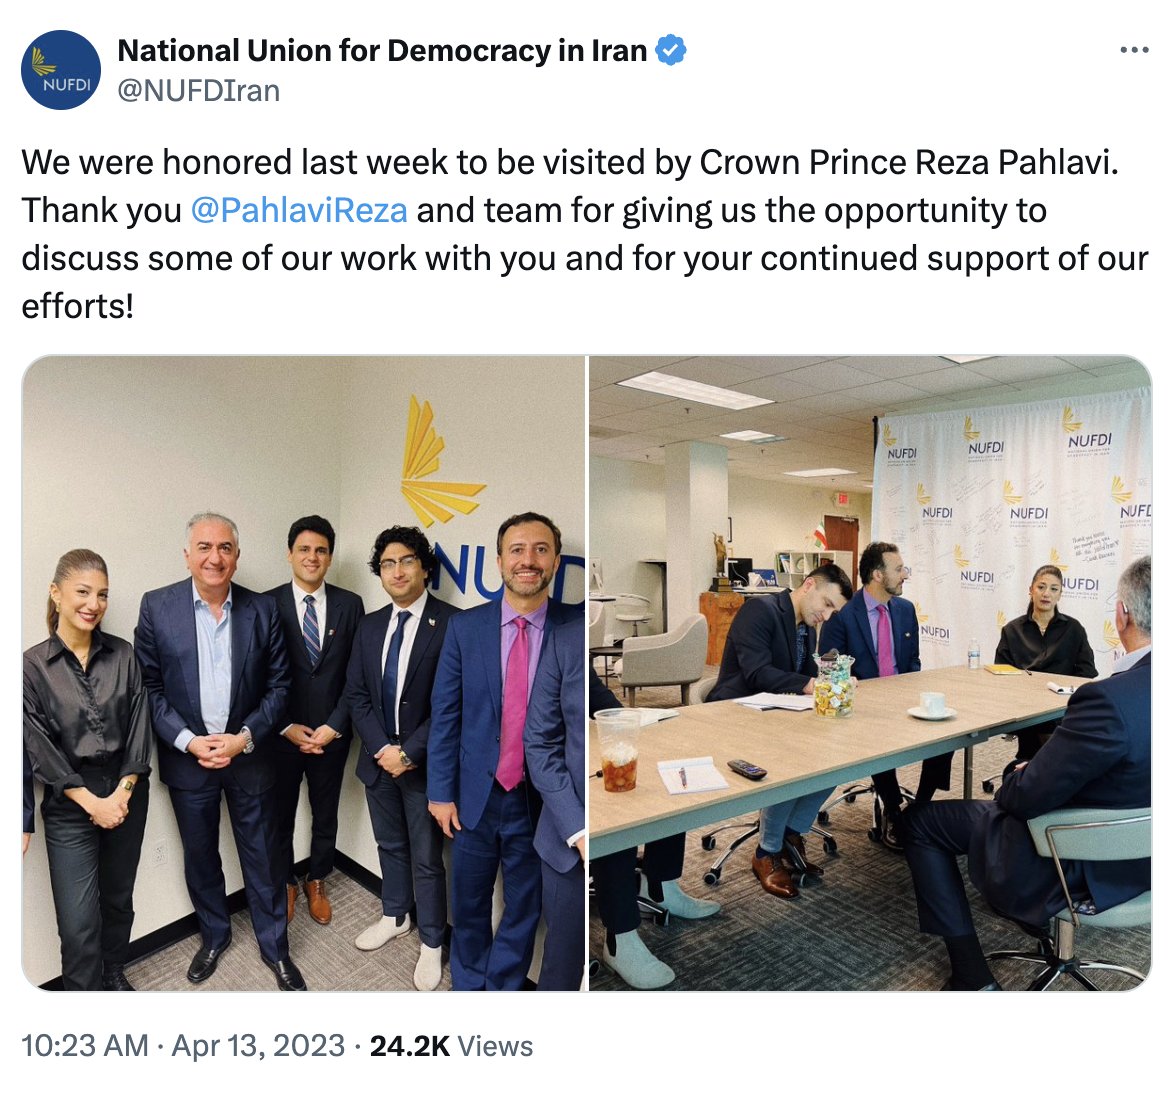 All significant NUFDI activities or events have revolved around Reza Pahlavi, including legislative activities, with the purpose of obtaining a photo op with Members of the United States Congress to build recognition in Washington.